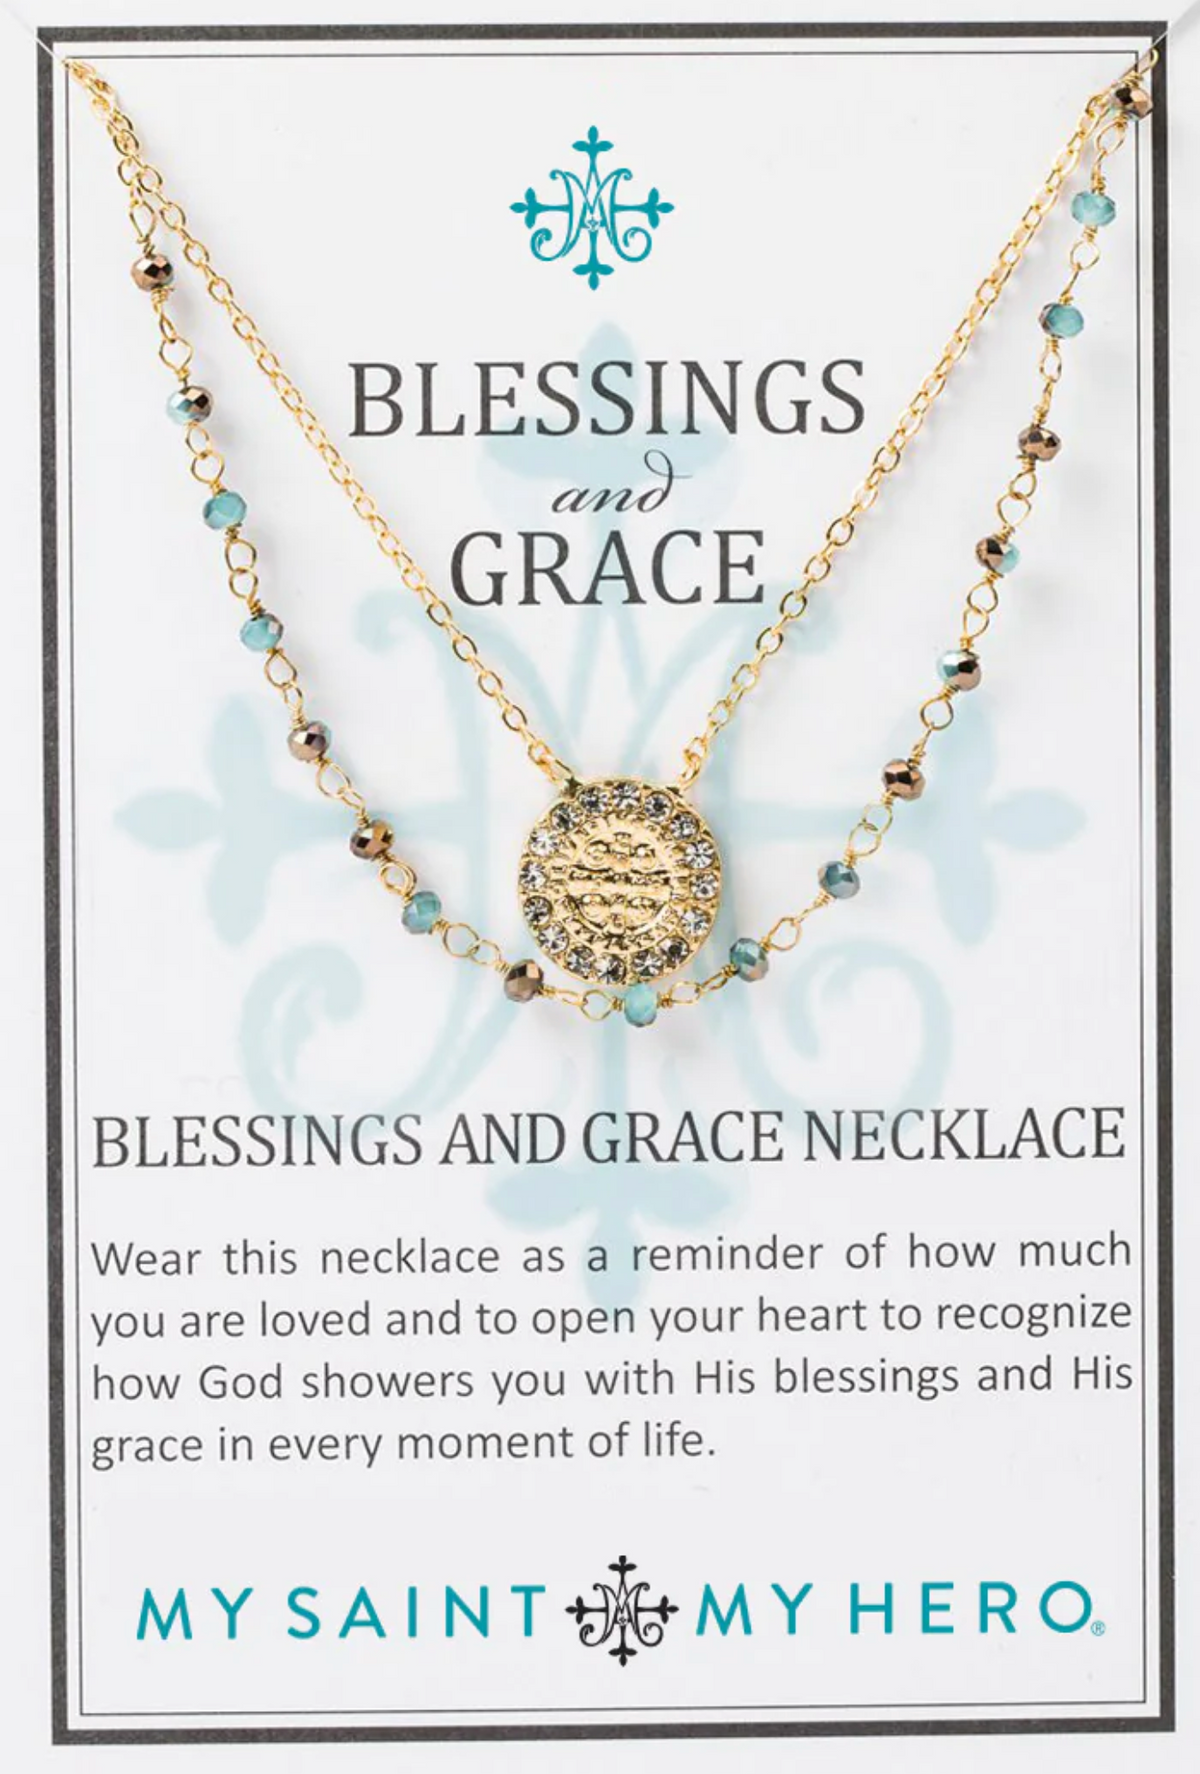 My Saint My Hero Blessings and Grace Necklace